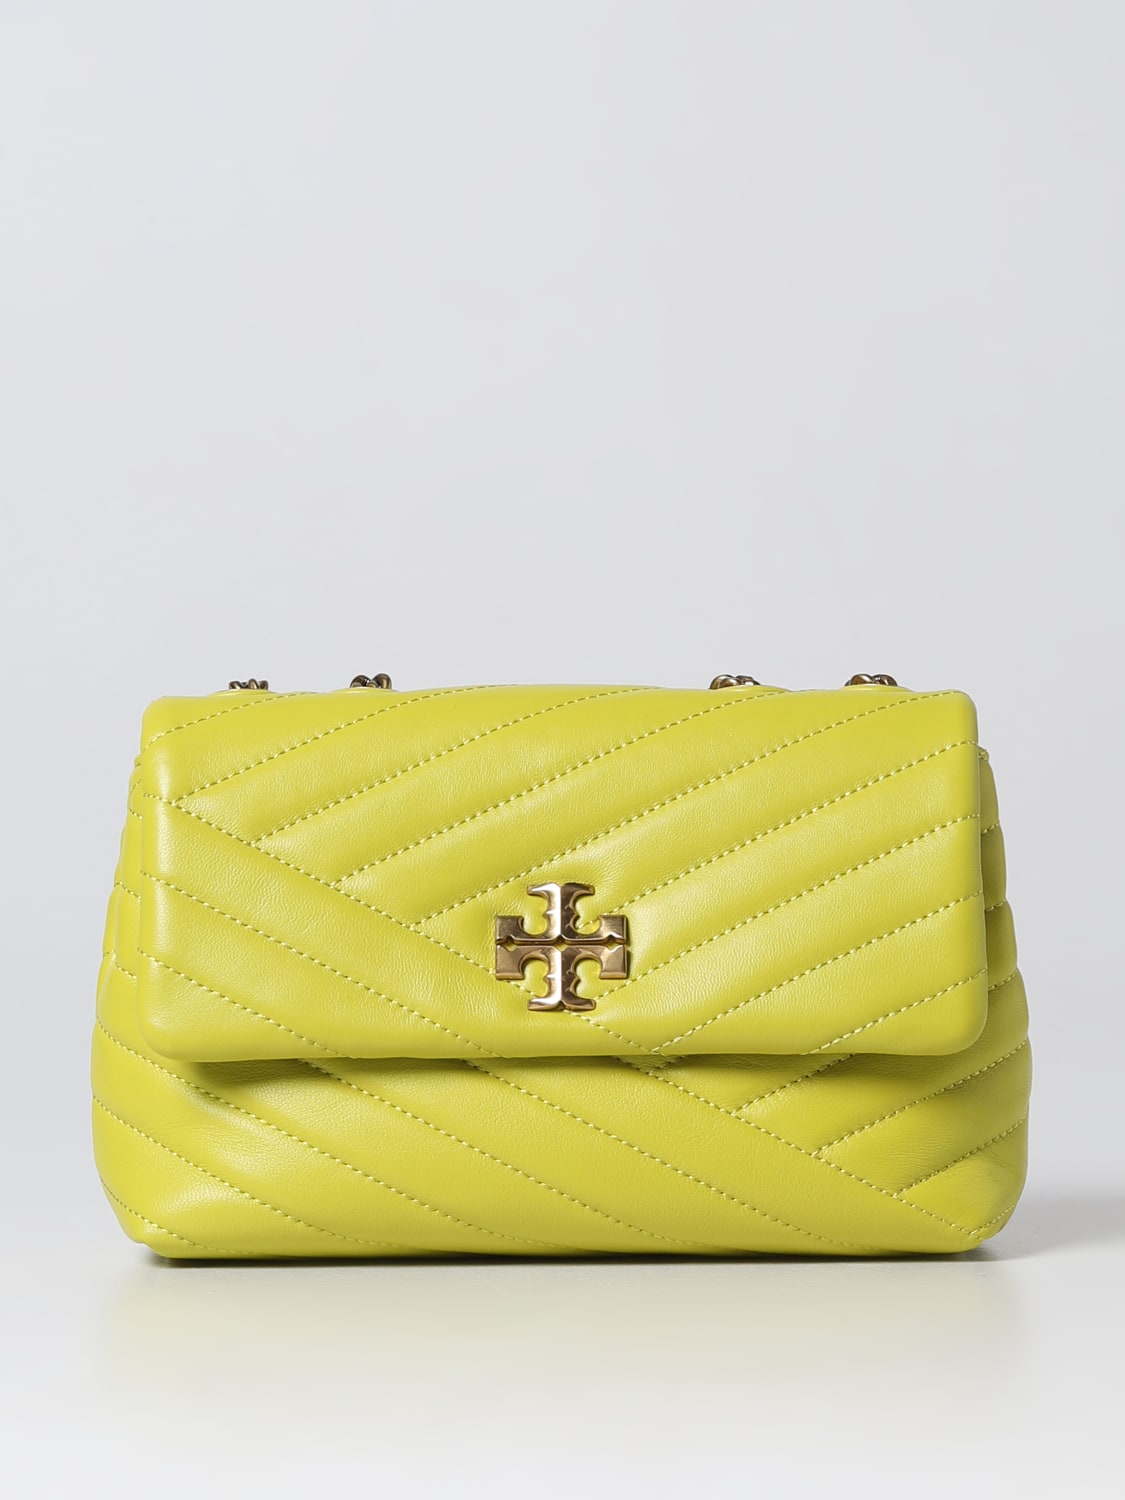 TORY BURCH: Kira bag in quilted leather - Lemon  Tory Burch shoulder bag  90452 online at